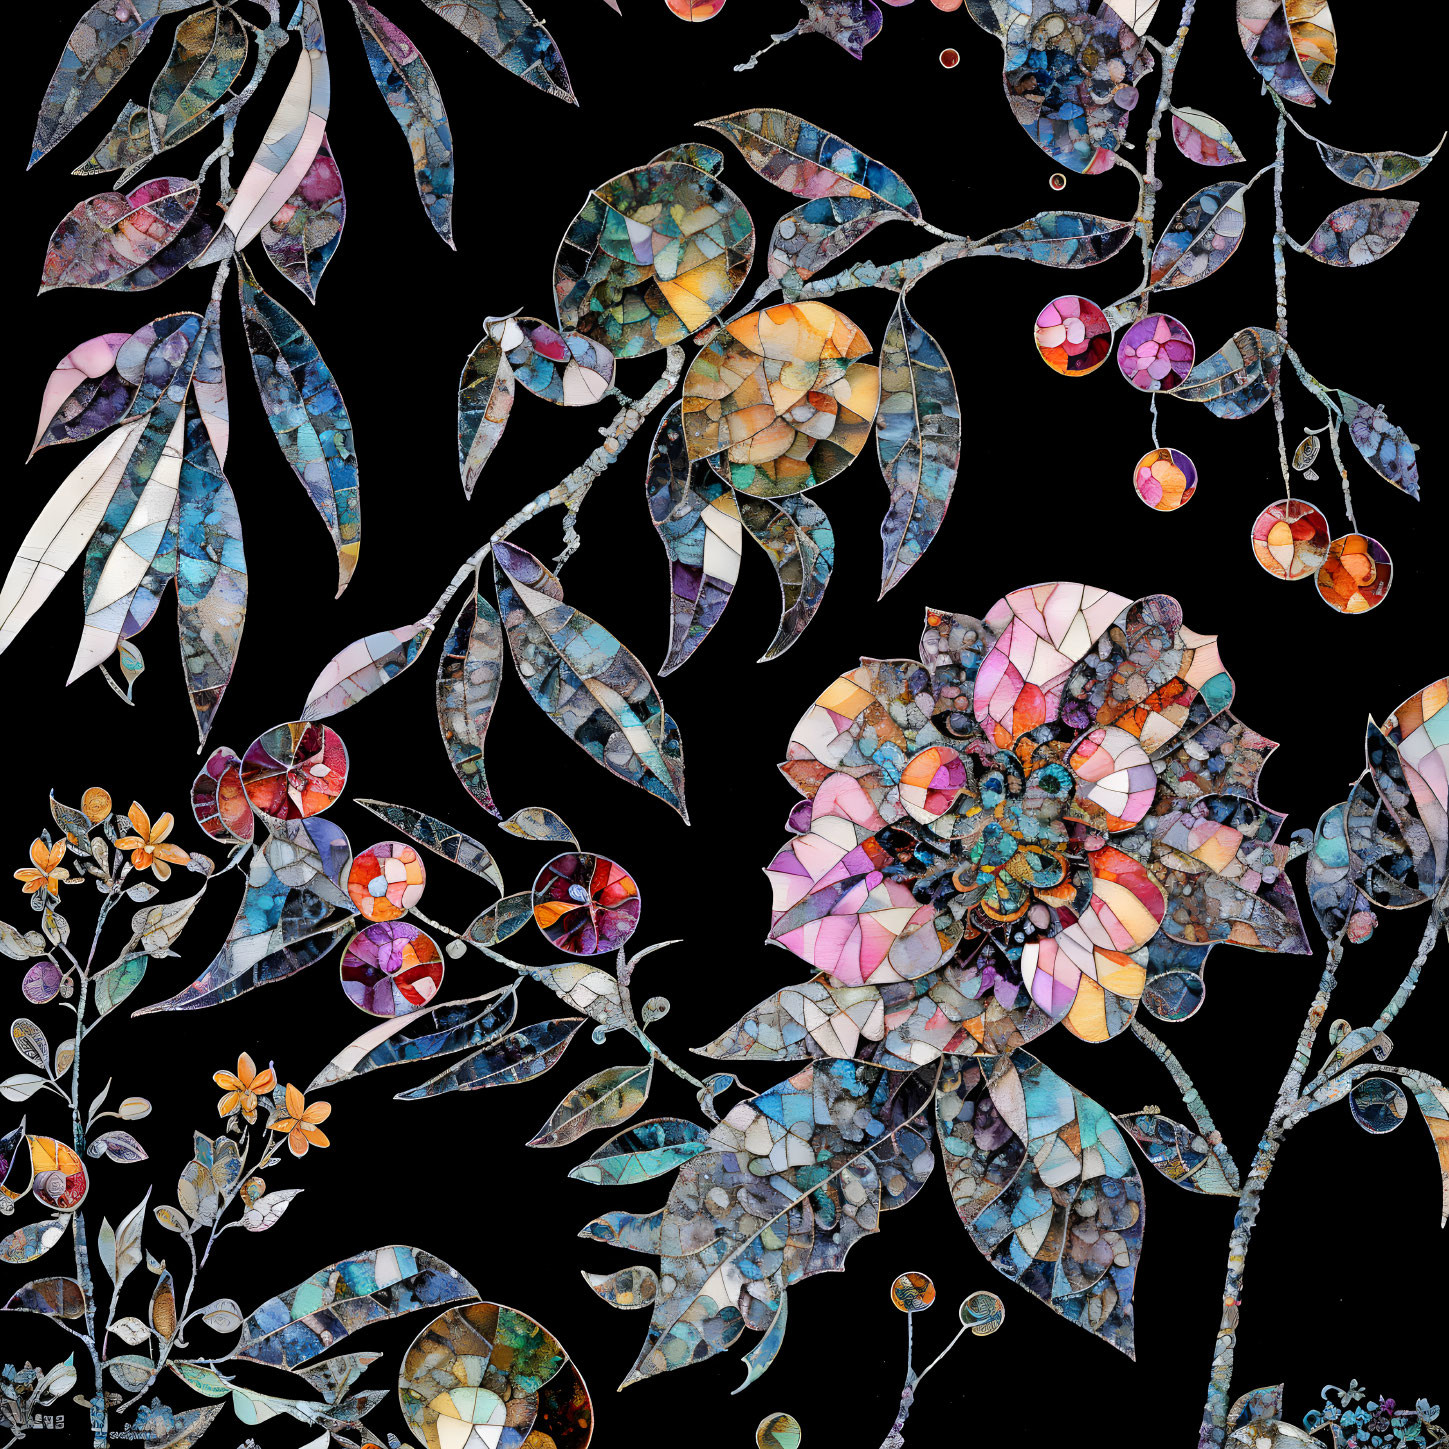 Colorful Stained Glass Flowers and Leaves on Black Background